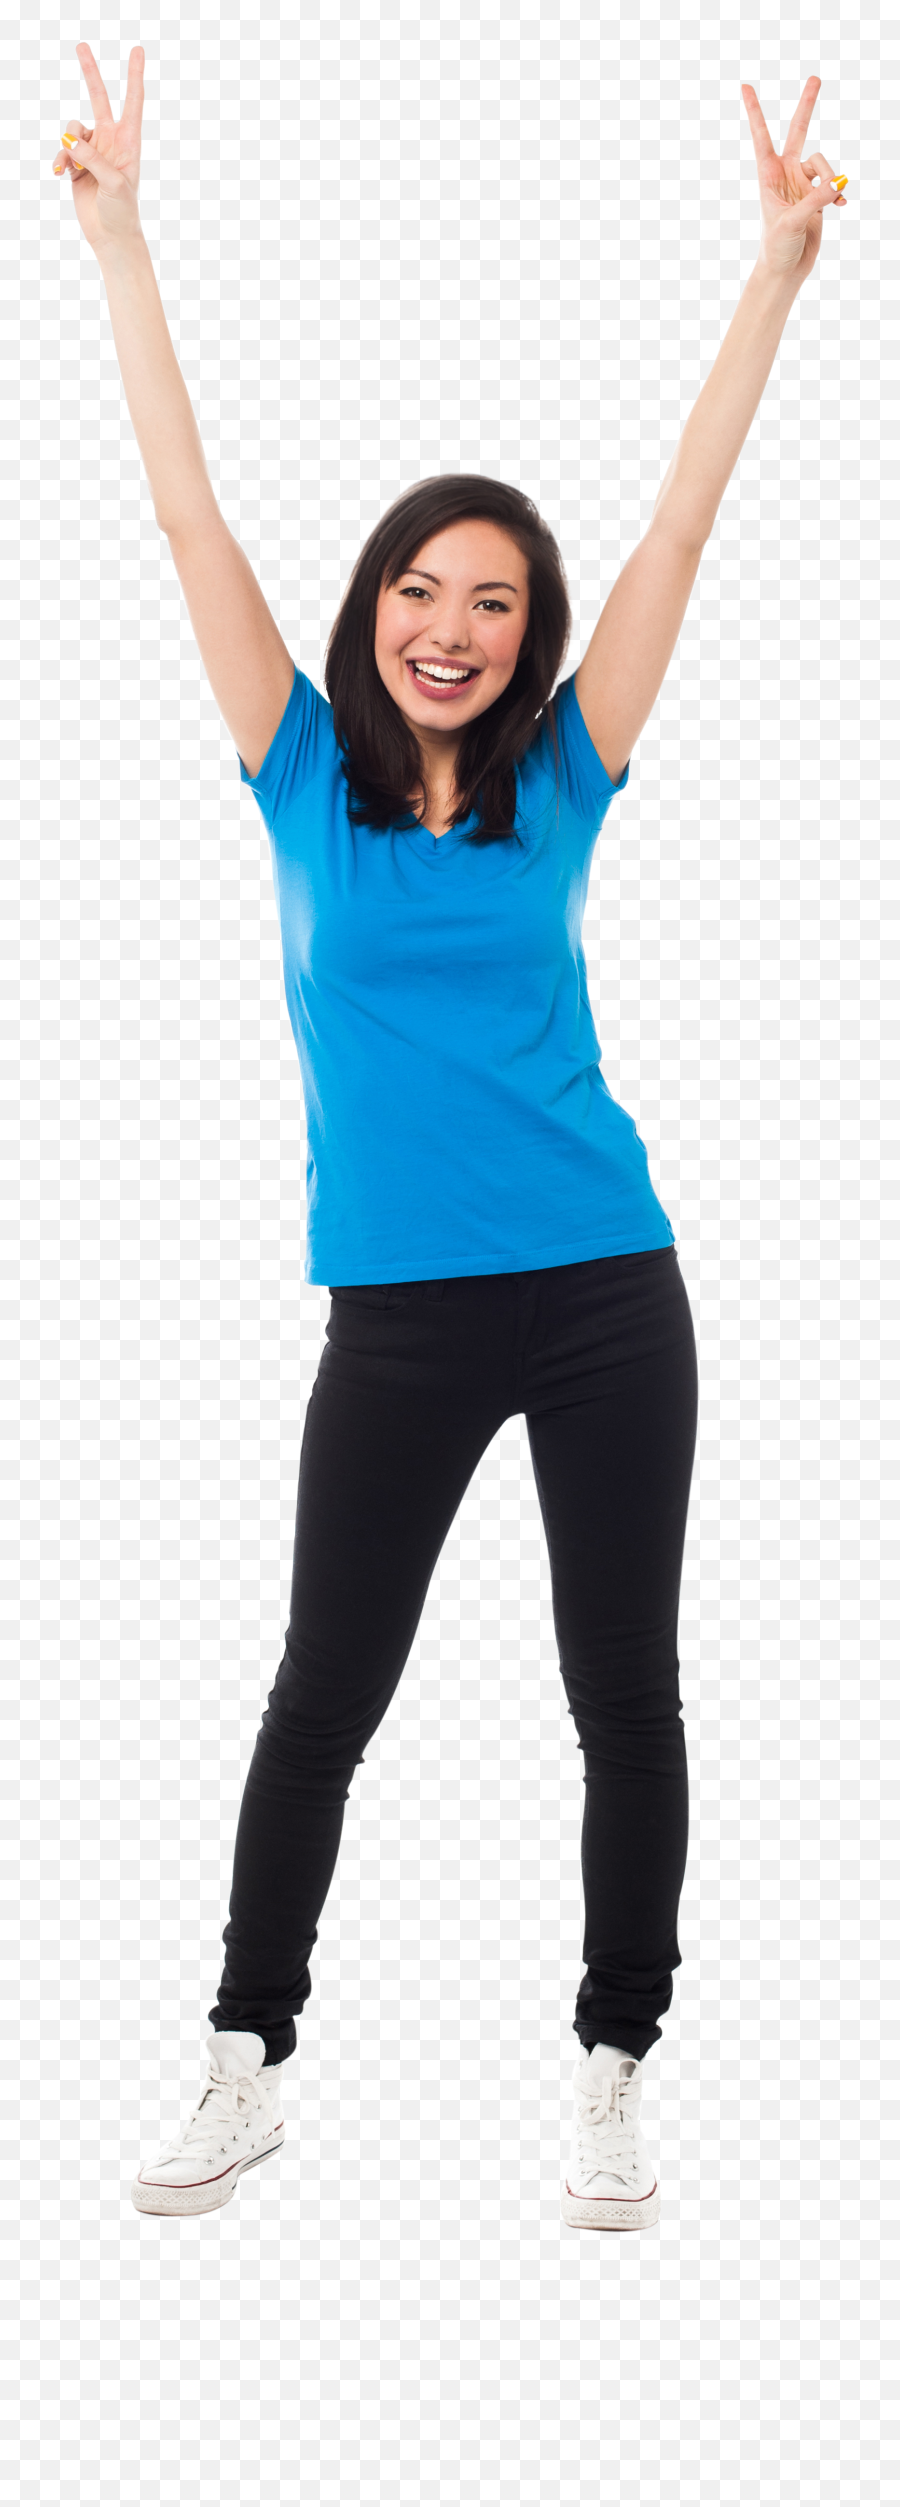 Happy Girl Png Transparent Images 14 Standing